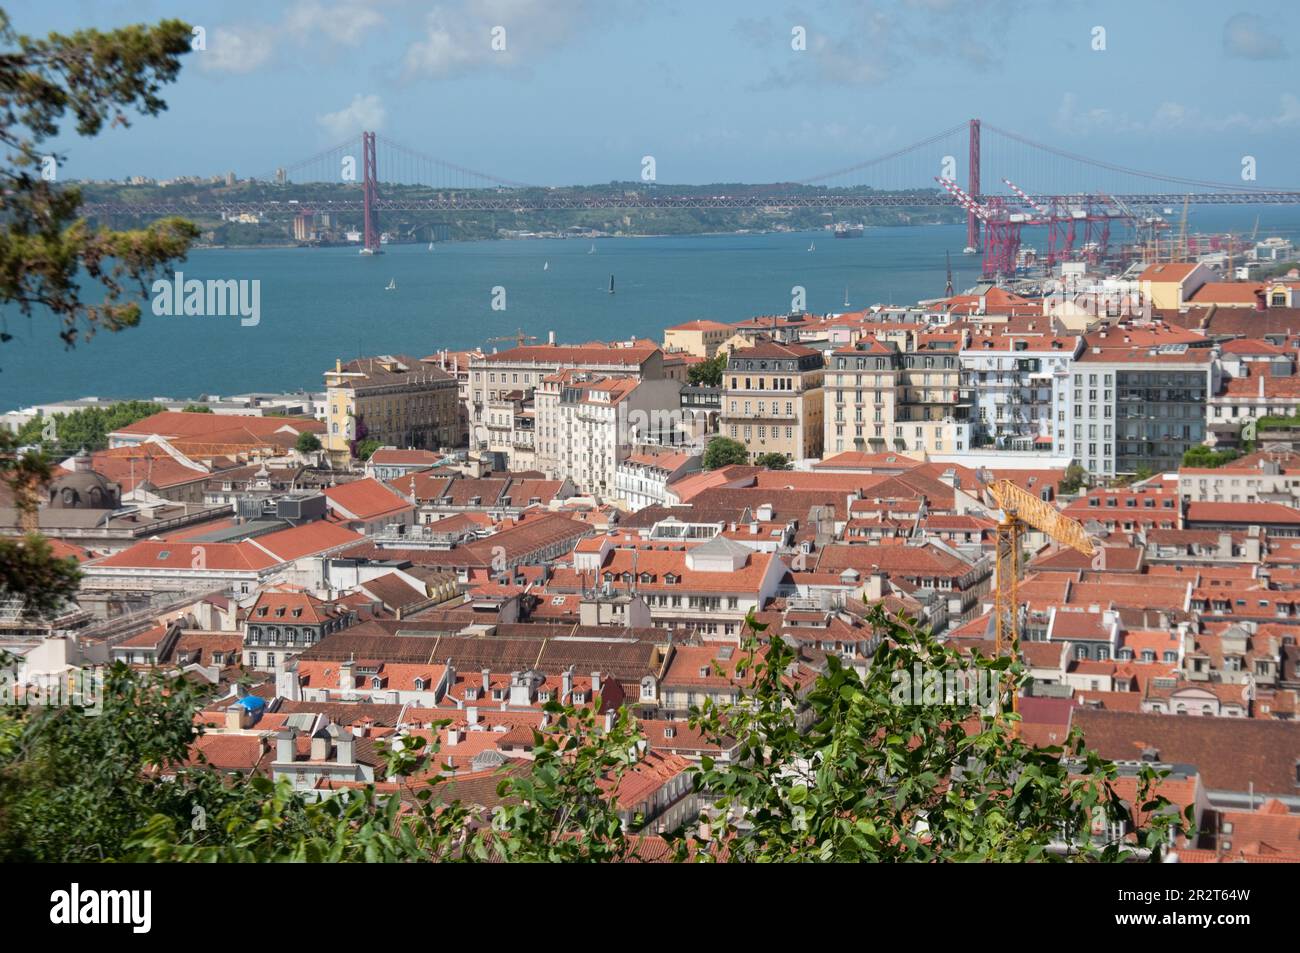 View from St George's Castle - rooftops, 25th April Bridge, River Tagus, Lisbon, Portugal Stock Photo